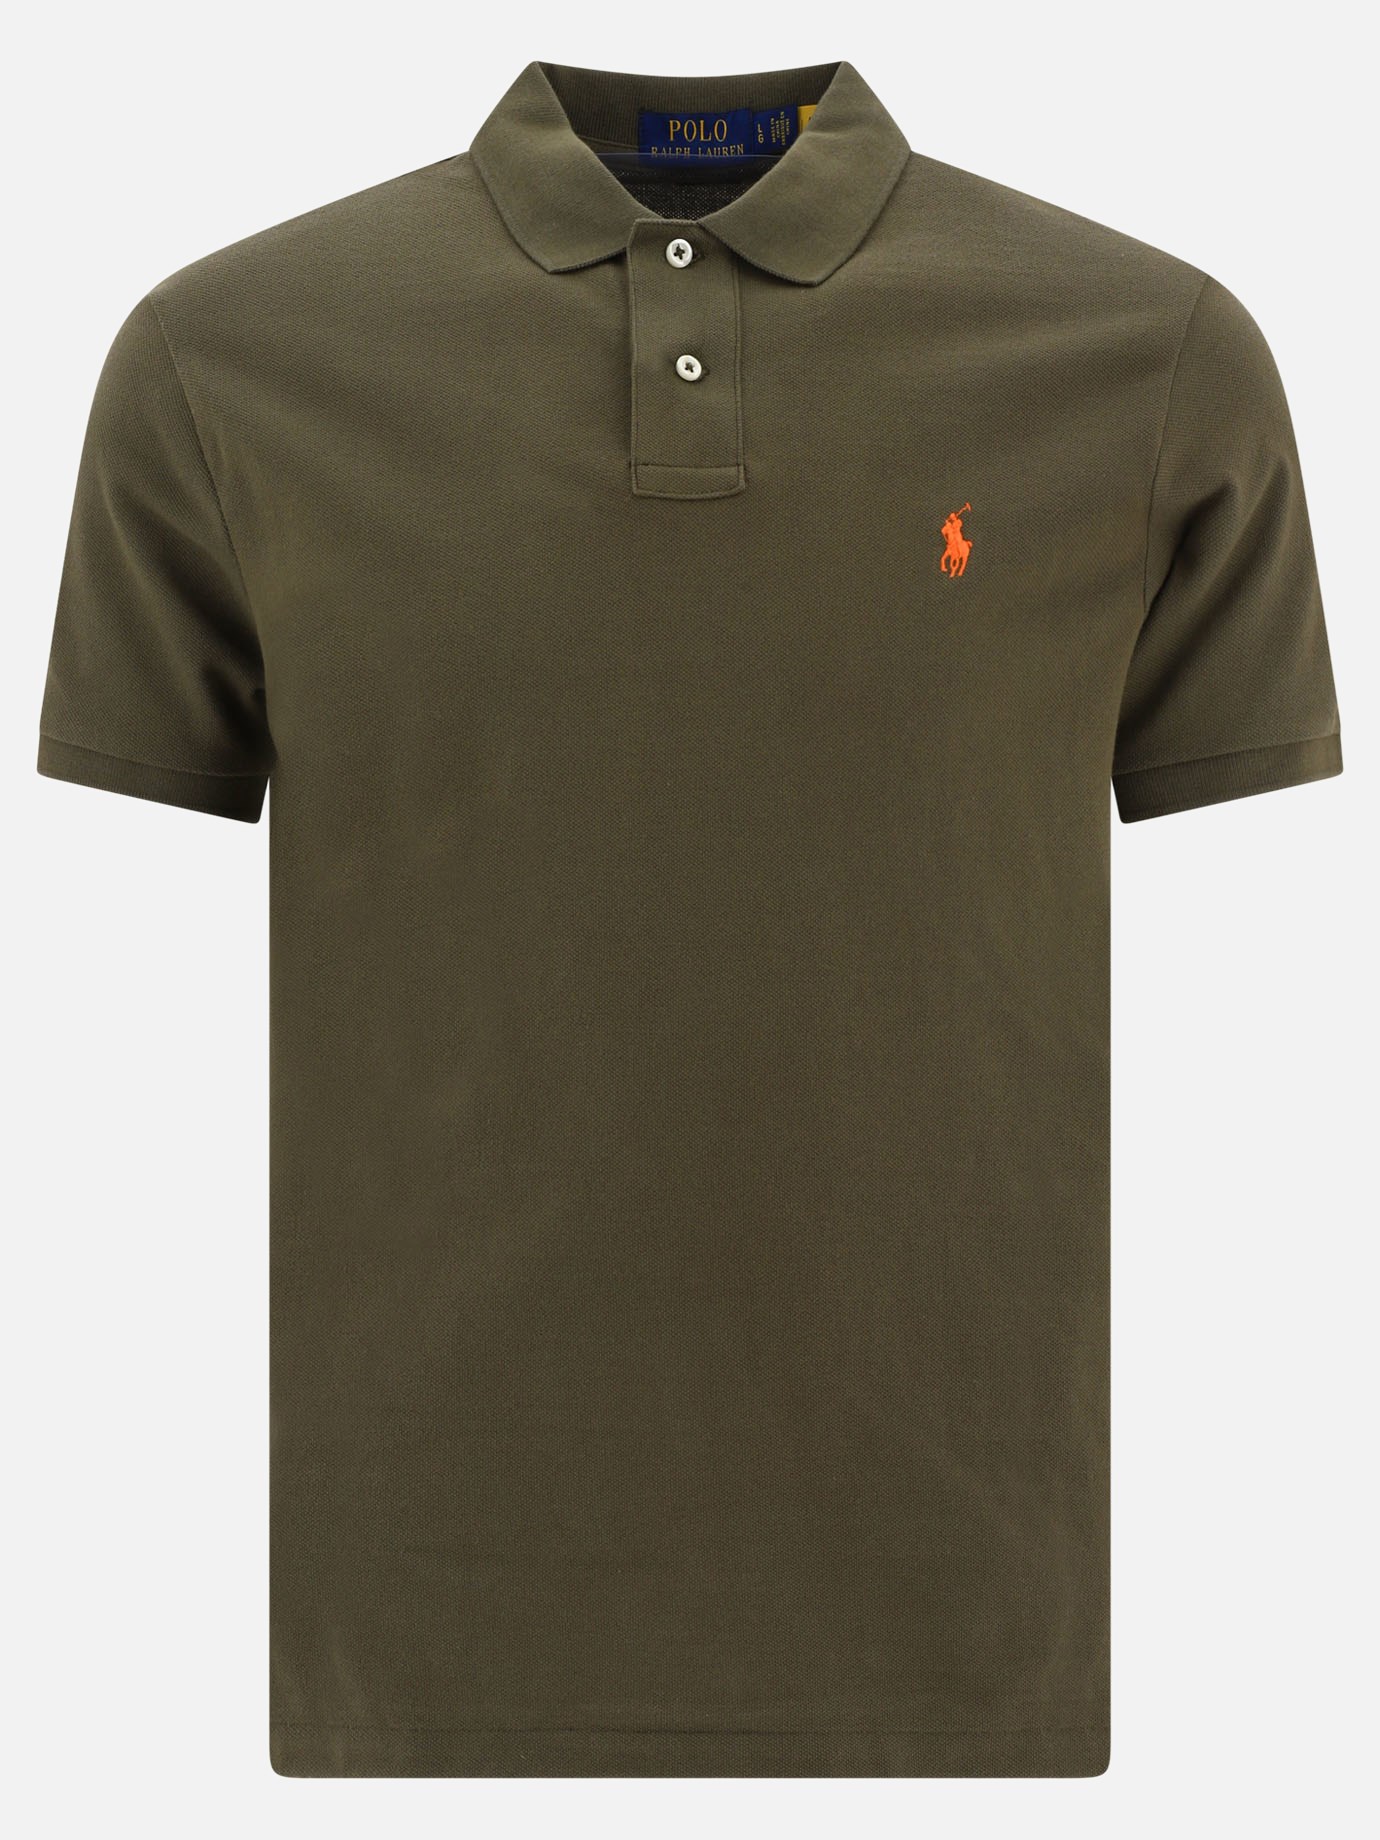  Pony  polo shirt by Polo Ralph Lauren